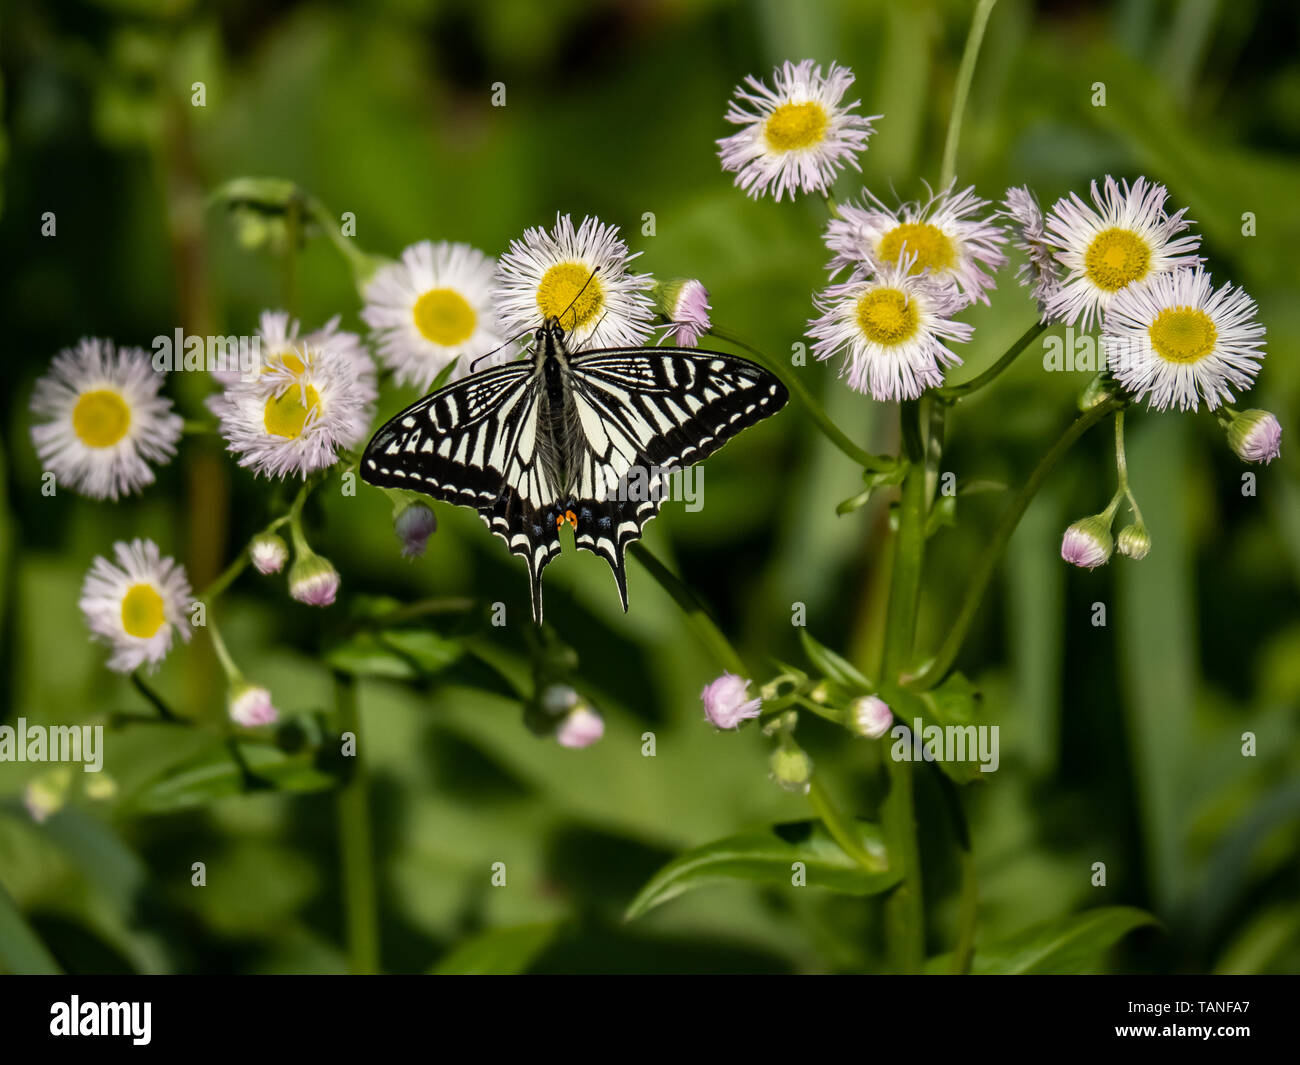 A Chinese yellow Swallowtail butterfly, Papilio xuthus, feeds from white wildflowers in Yokohama, Japan. Stock Photo